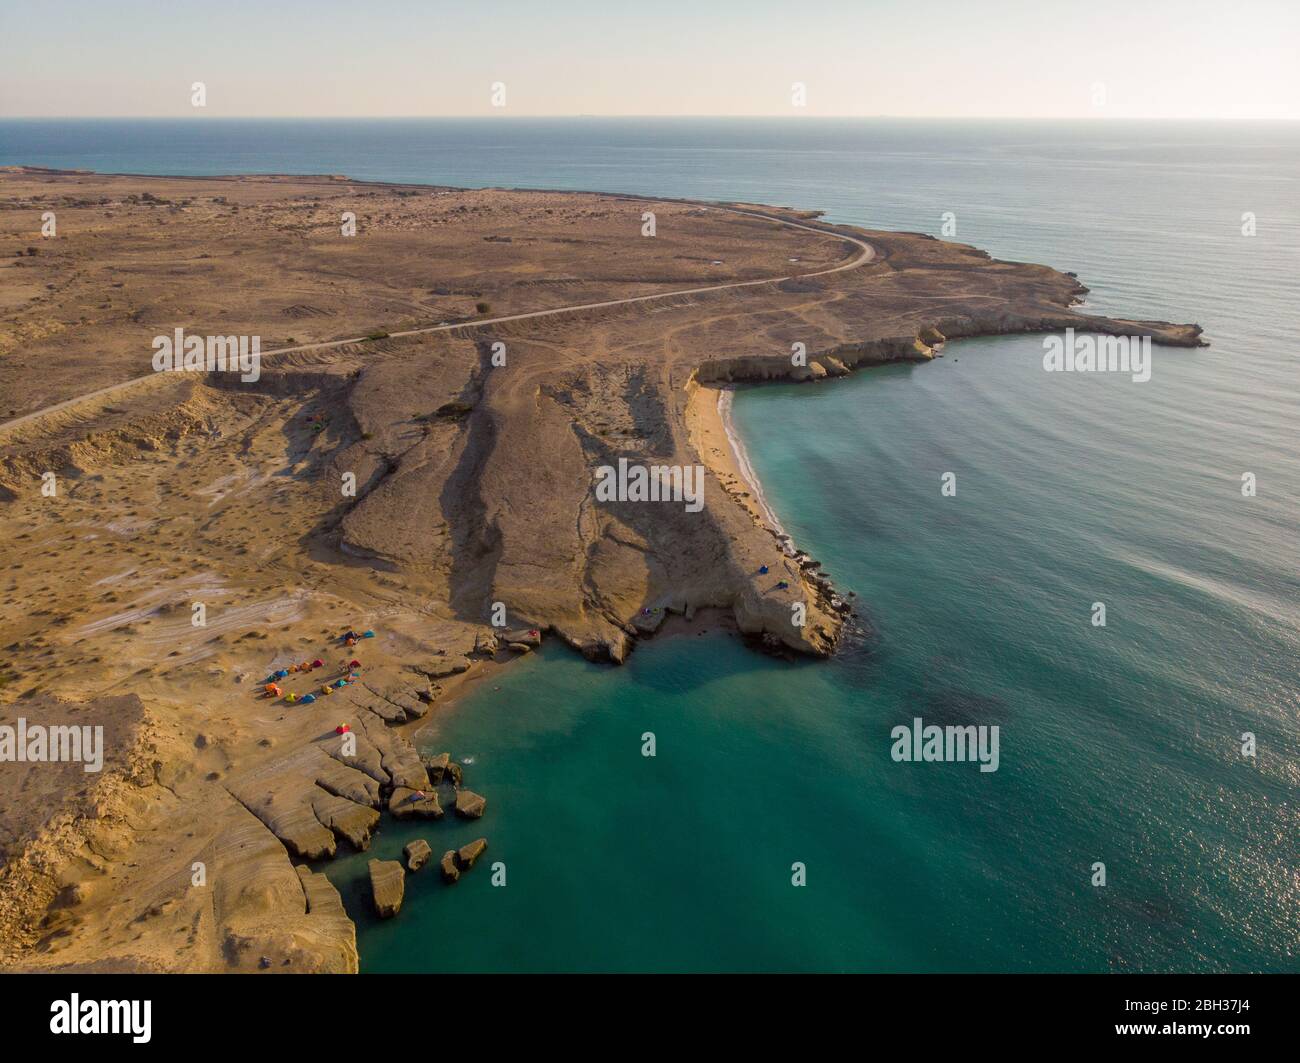 Drone aerial view over the coast of a beach in Hengam in Iran Stock Photo